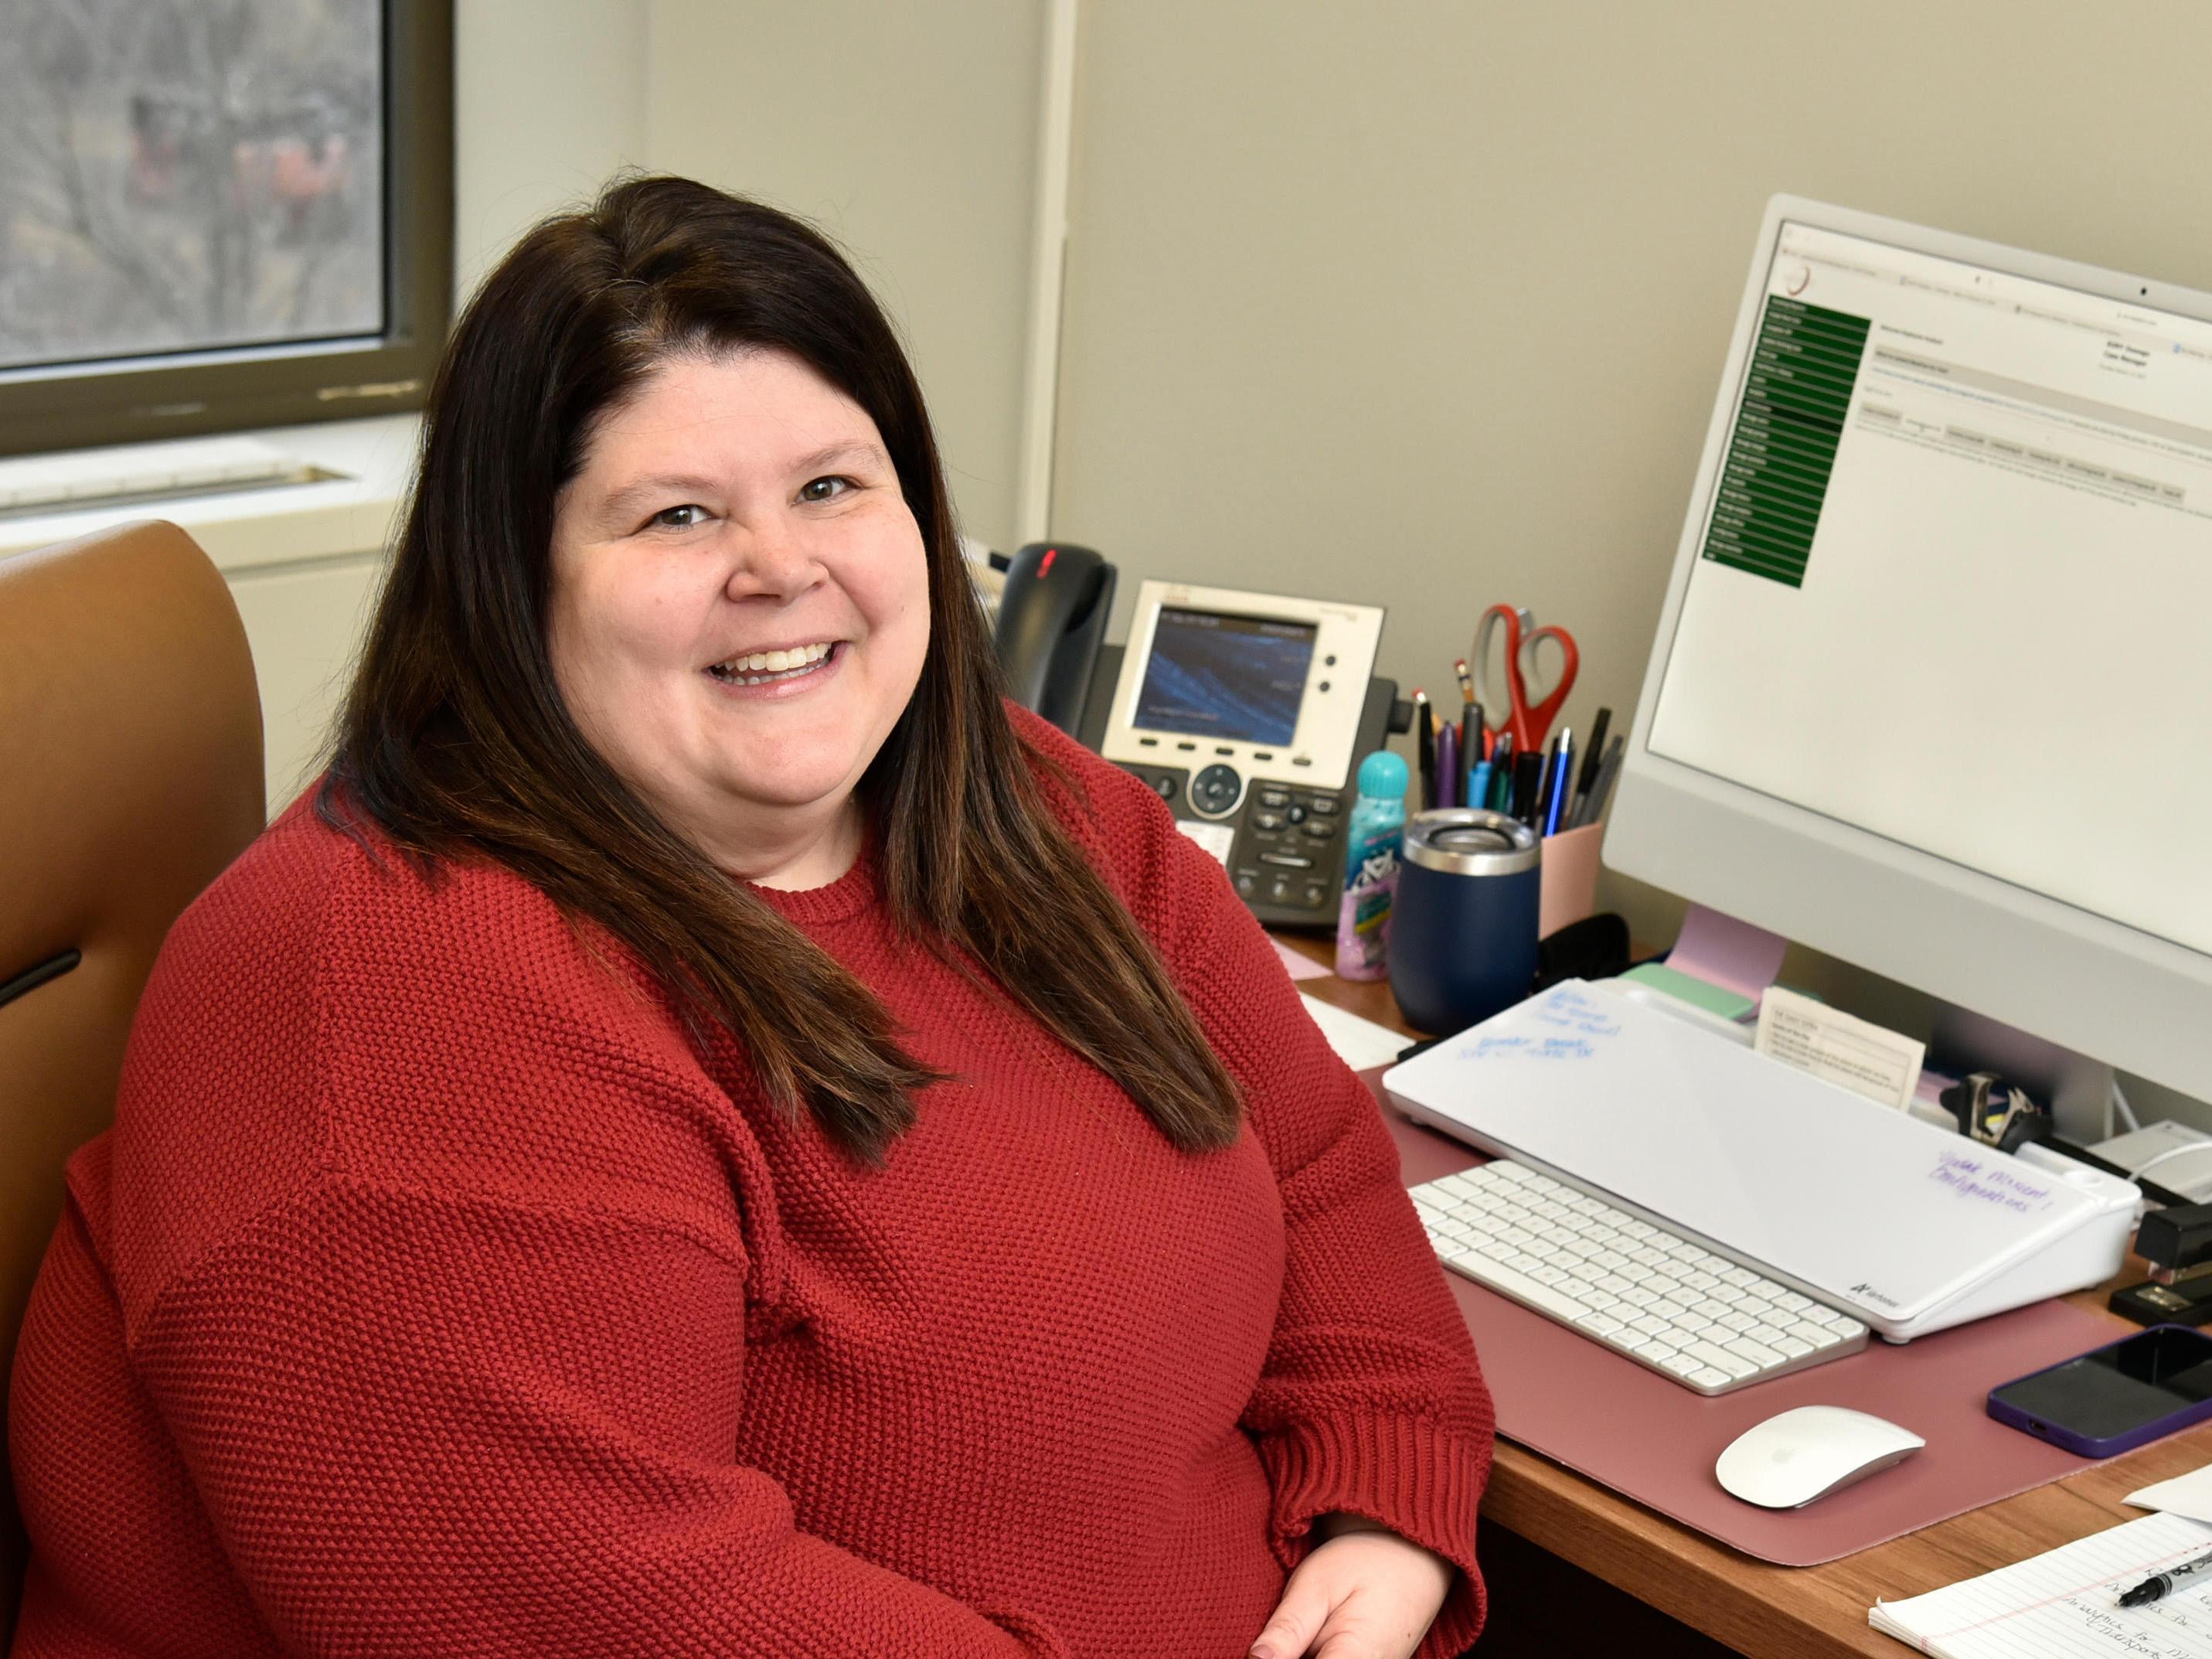 Stephanie Hudson is one of the first students in SUNY Oswego's new master's in higher education program